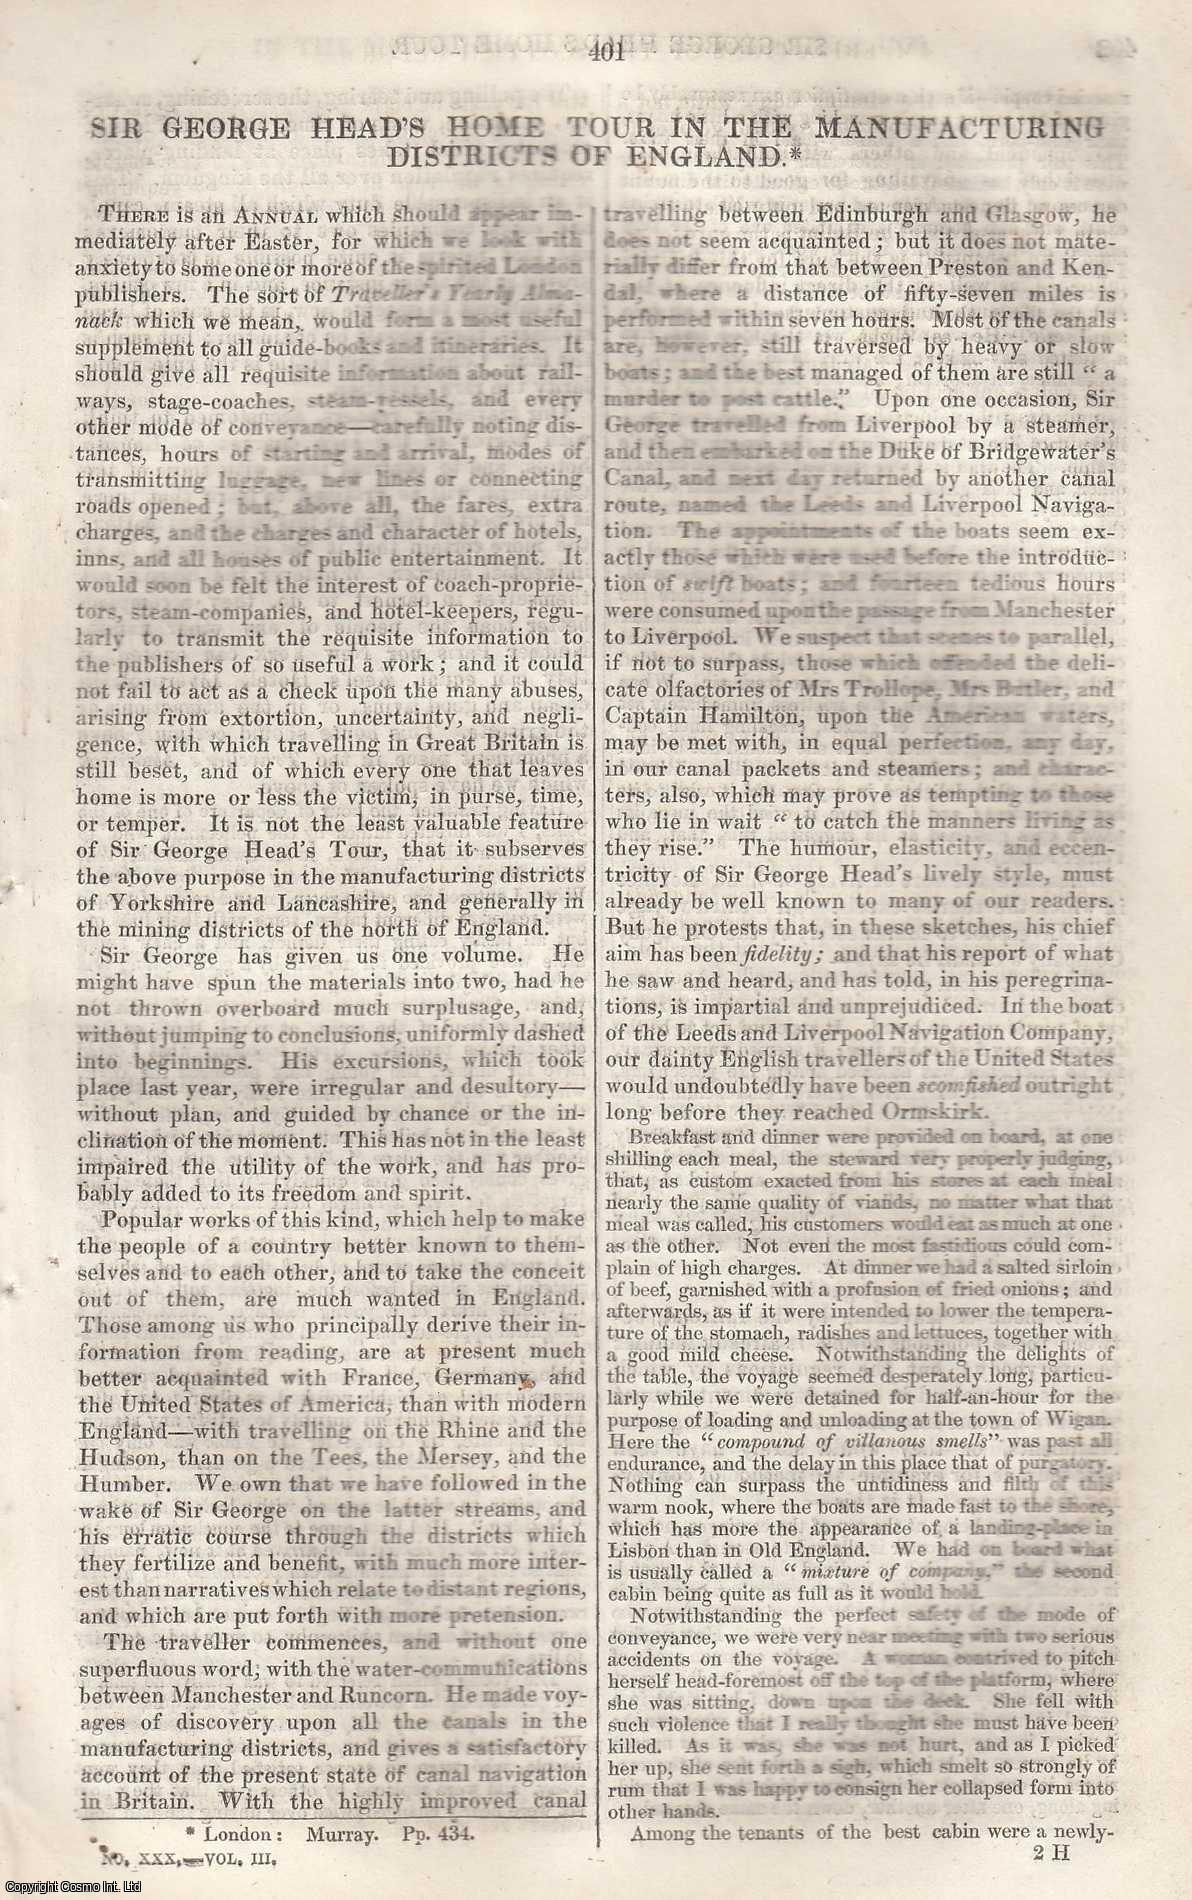 Johnstone, Christian - Sir George Head's Home Tour in The Manufacturing District of England. An original article from Tait's Edinburgh Magazine, 1836.